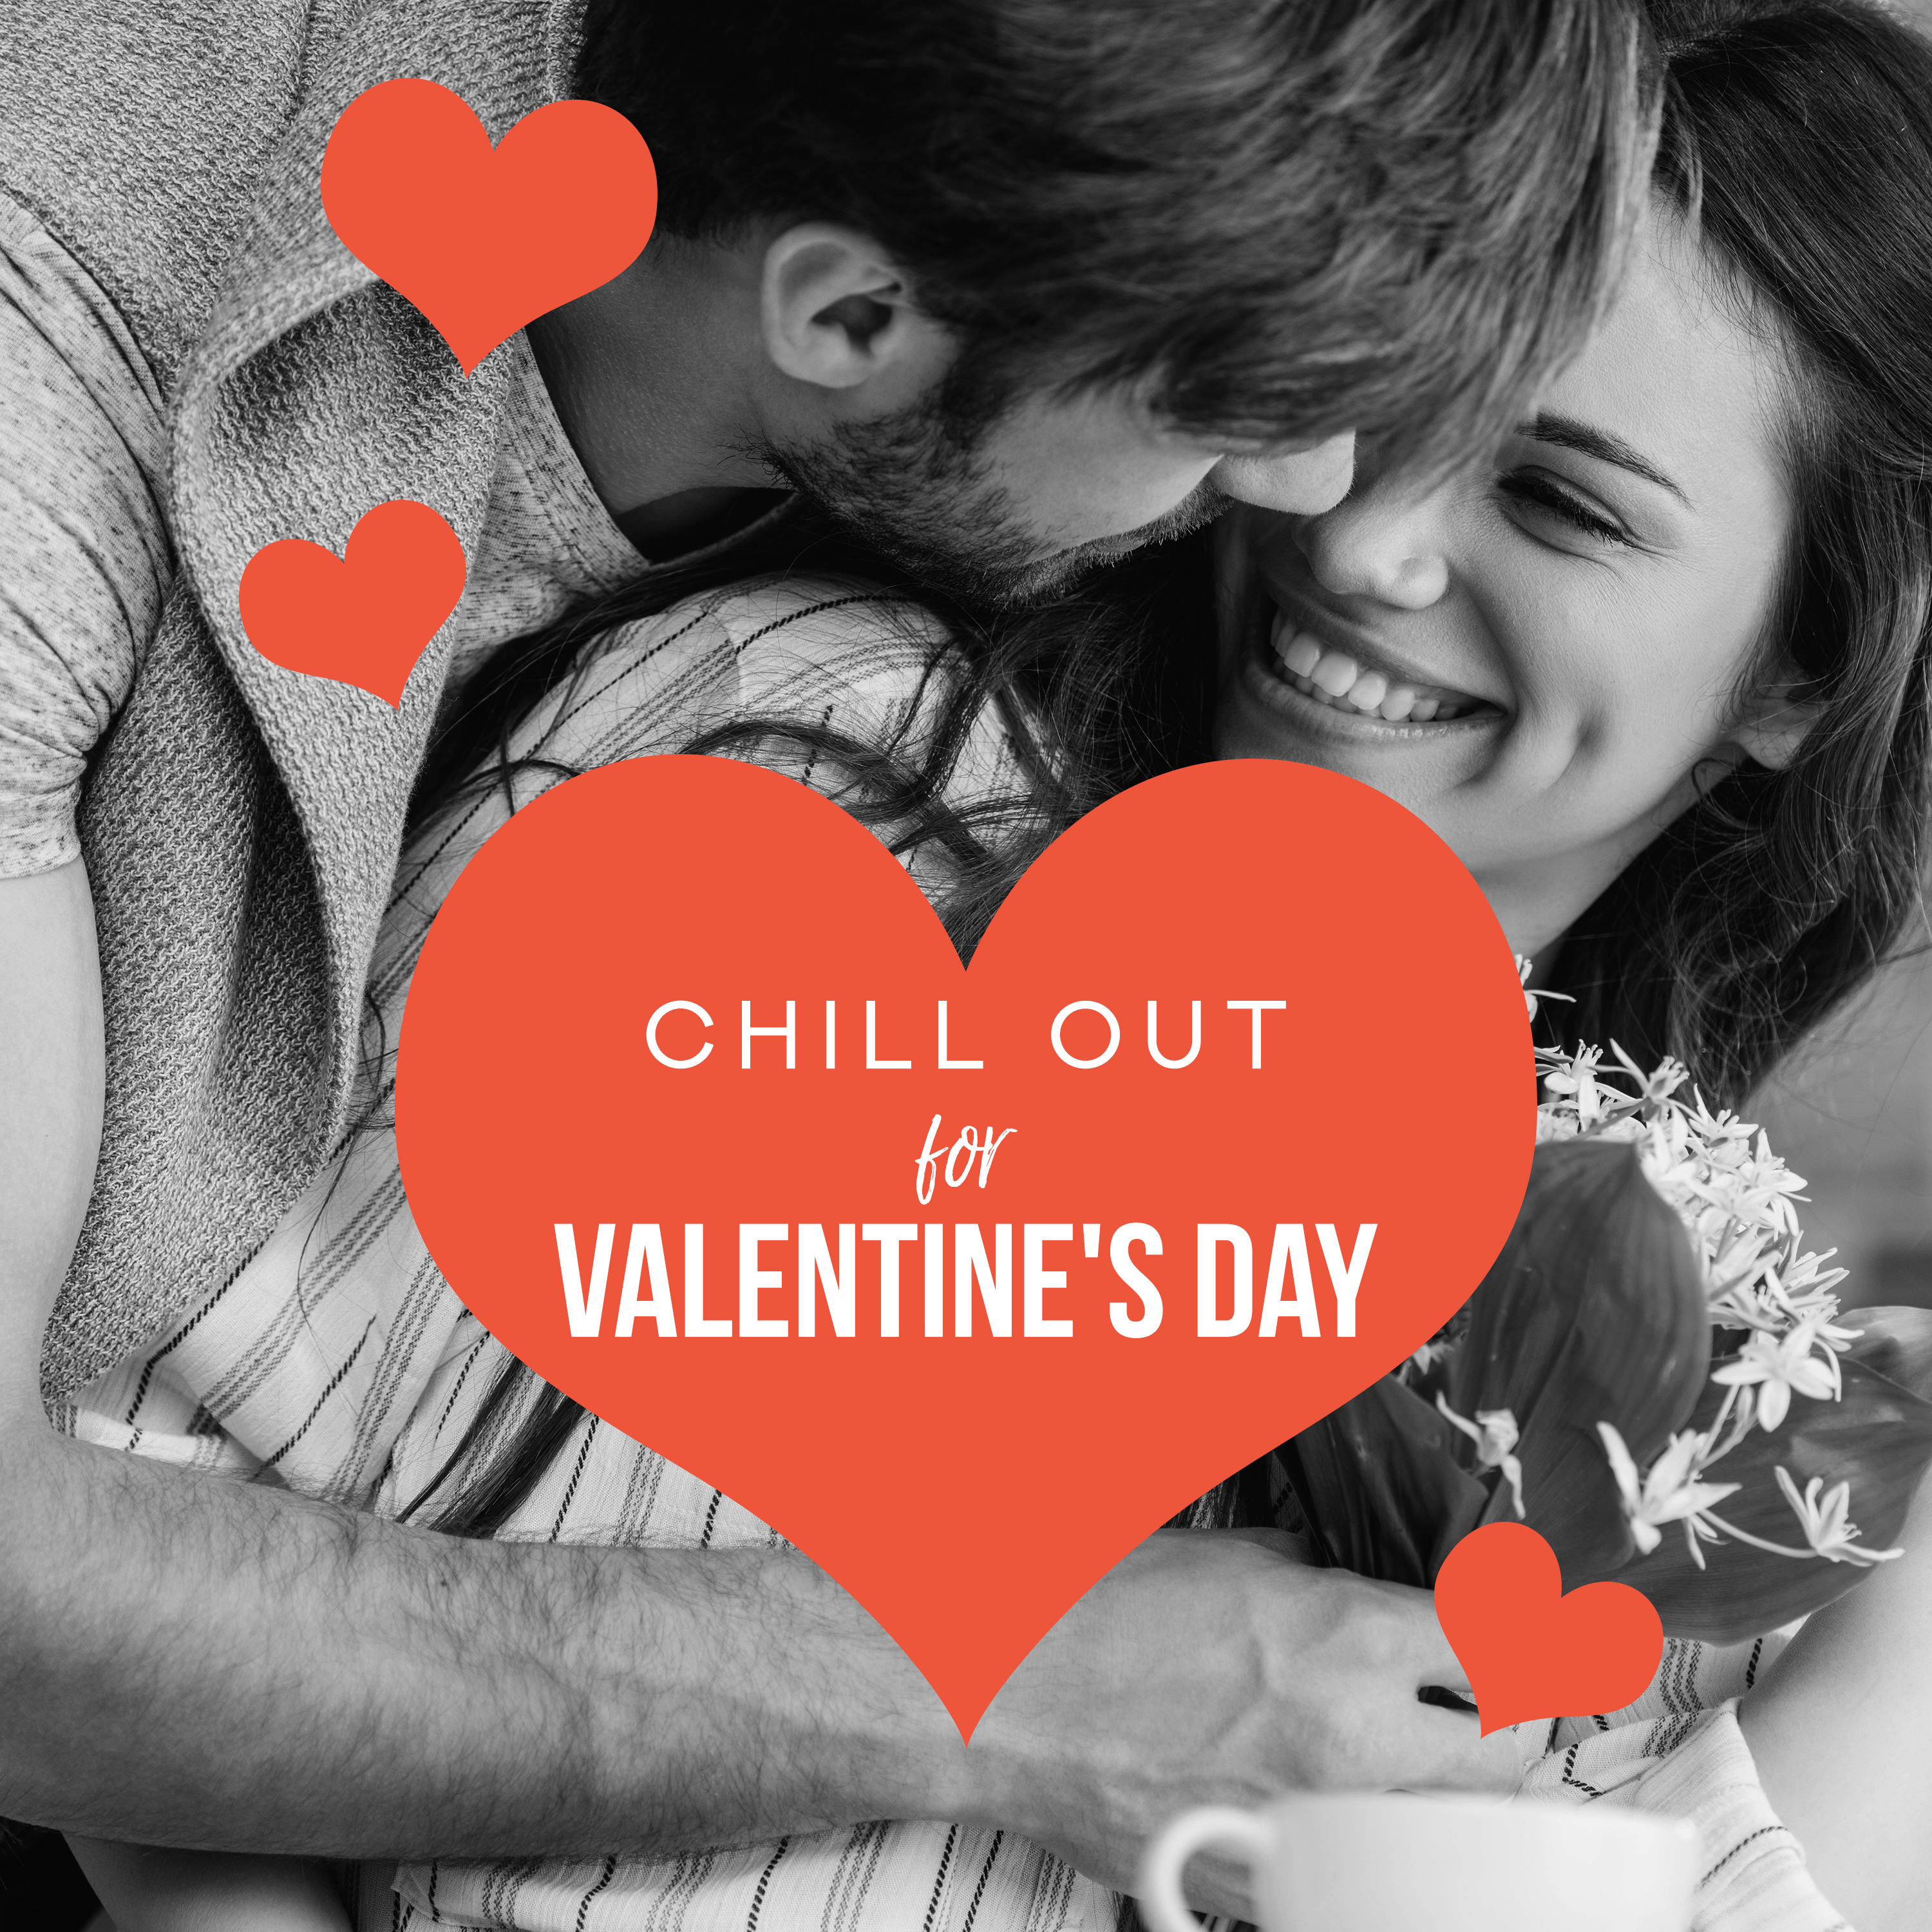 Chill Out for Lovers